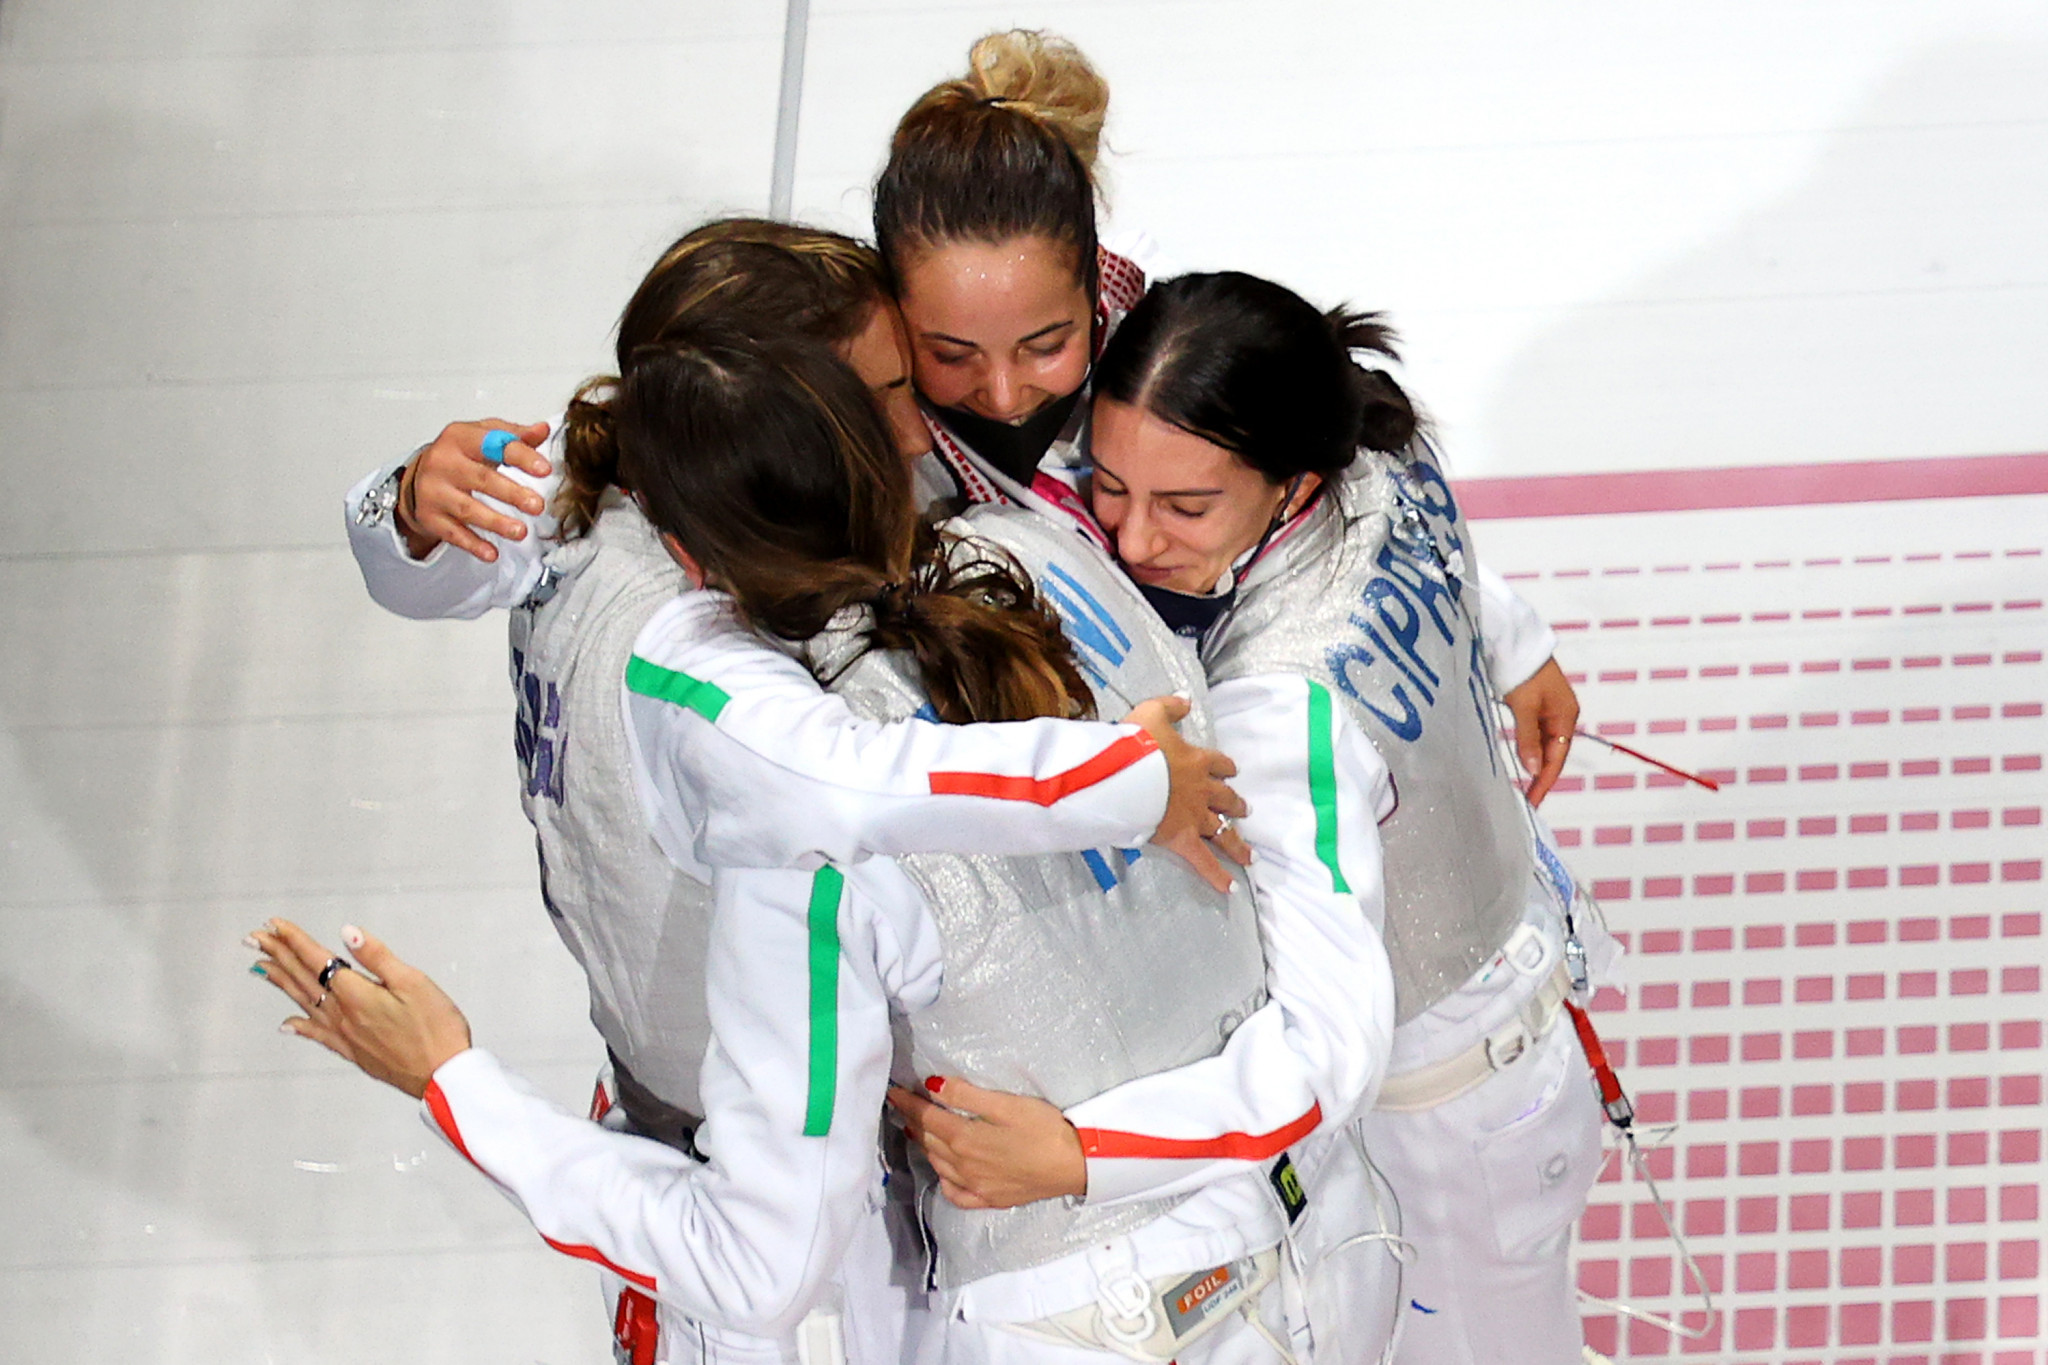 Italy won two team foil medals today in Paris ©Getty Images